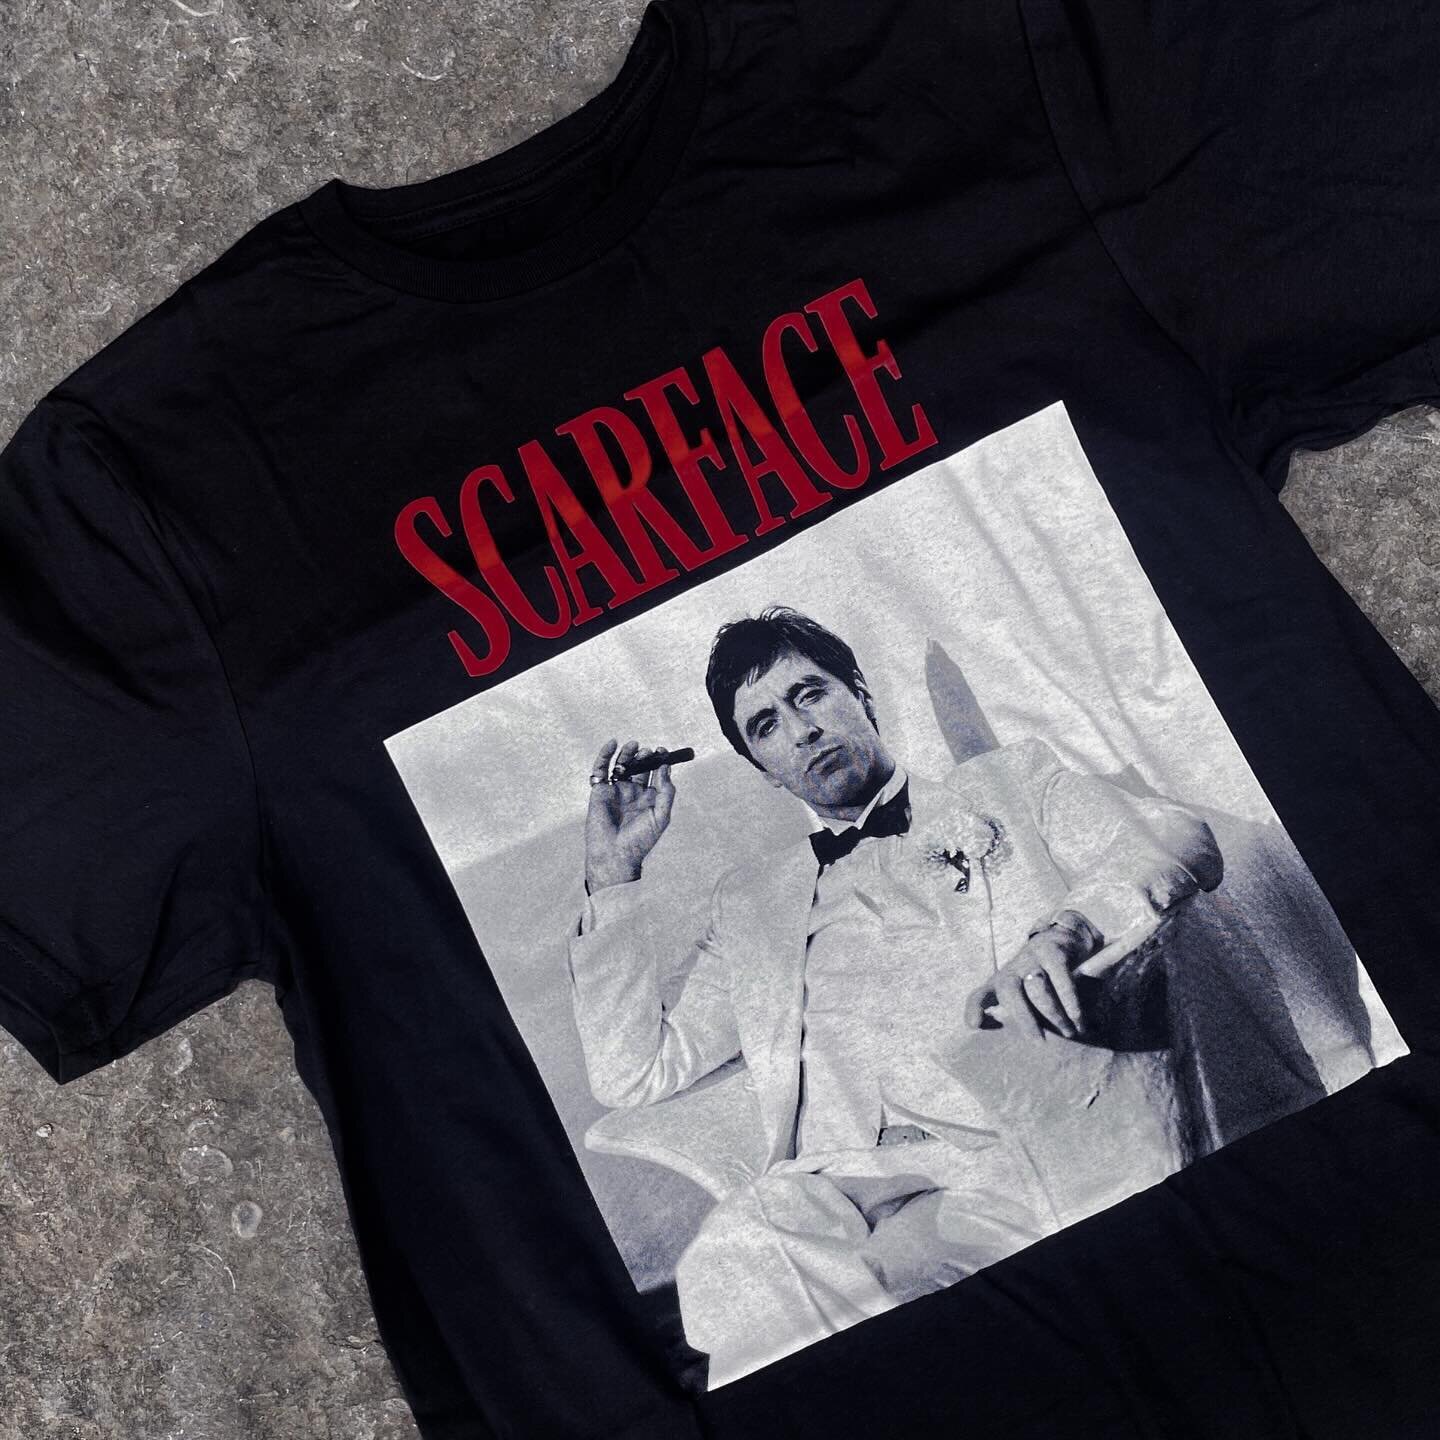 New T-shirts in this week.

All are available in our &lsquo;2 for &pound;27.50&rsquo; offer.

#tvm #tvmnorwich #tvandmoviestore #televisionandmoviestore #thetelevisionandmoviestore #norwich #scarface #alpacino #thecrow #ericdraven #crow #brandonlee #